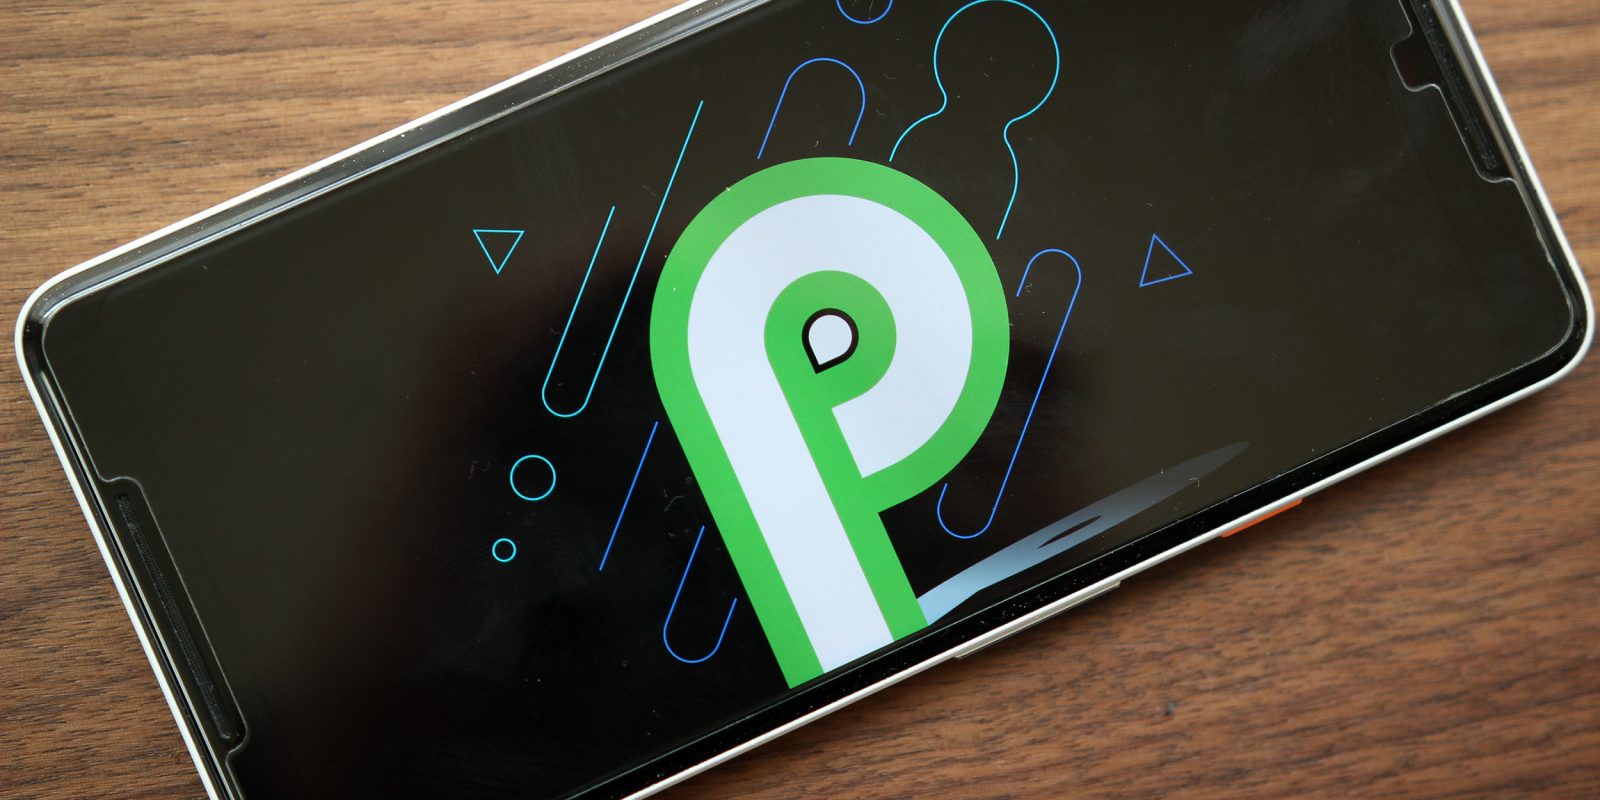 Google Launches New Operating System Android P Beta Install in 8 Steps